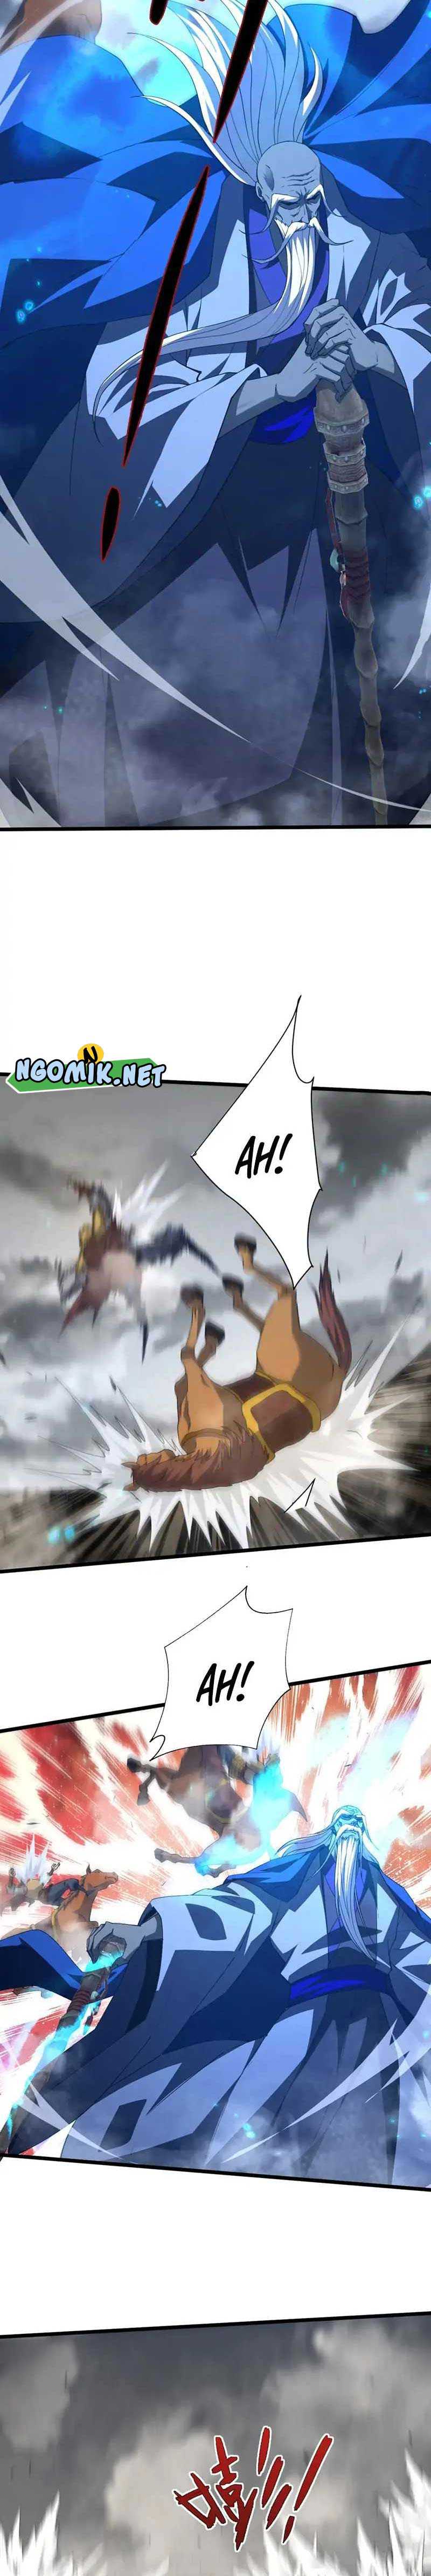 Second Fight Against the Heavens Chapter 56